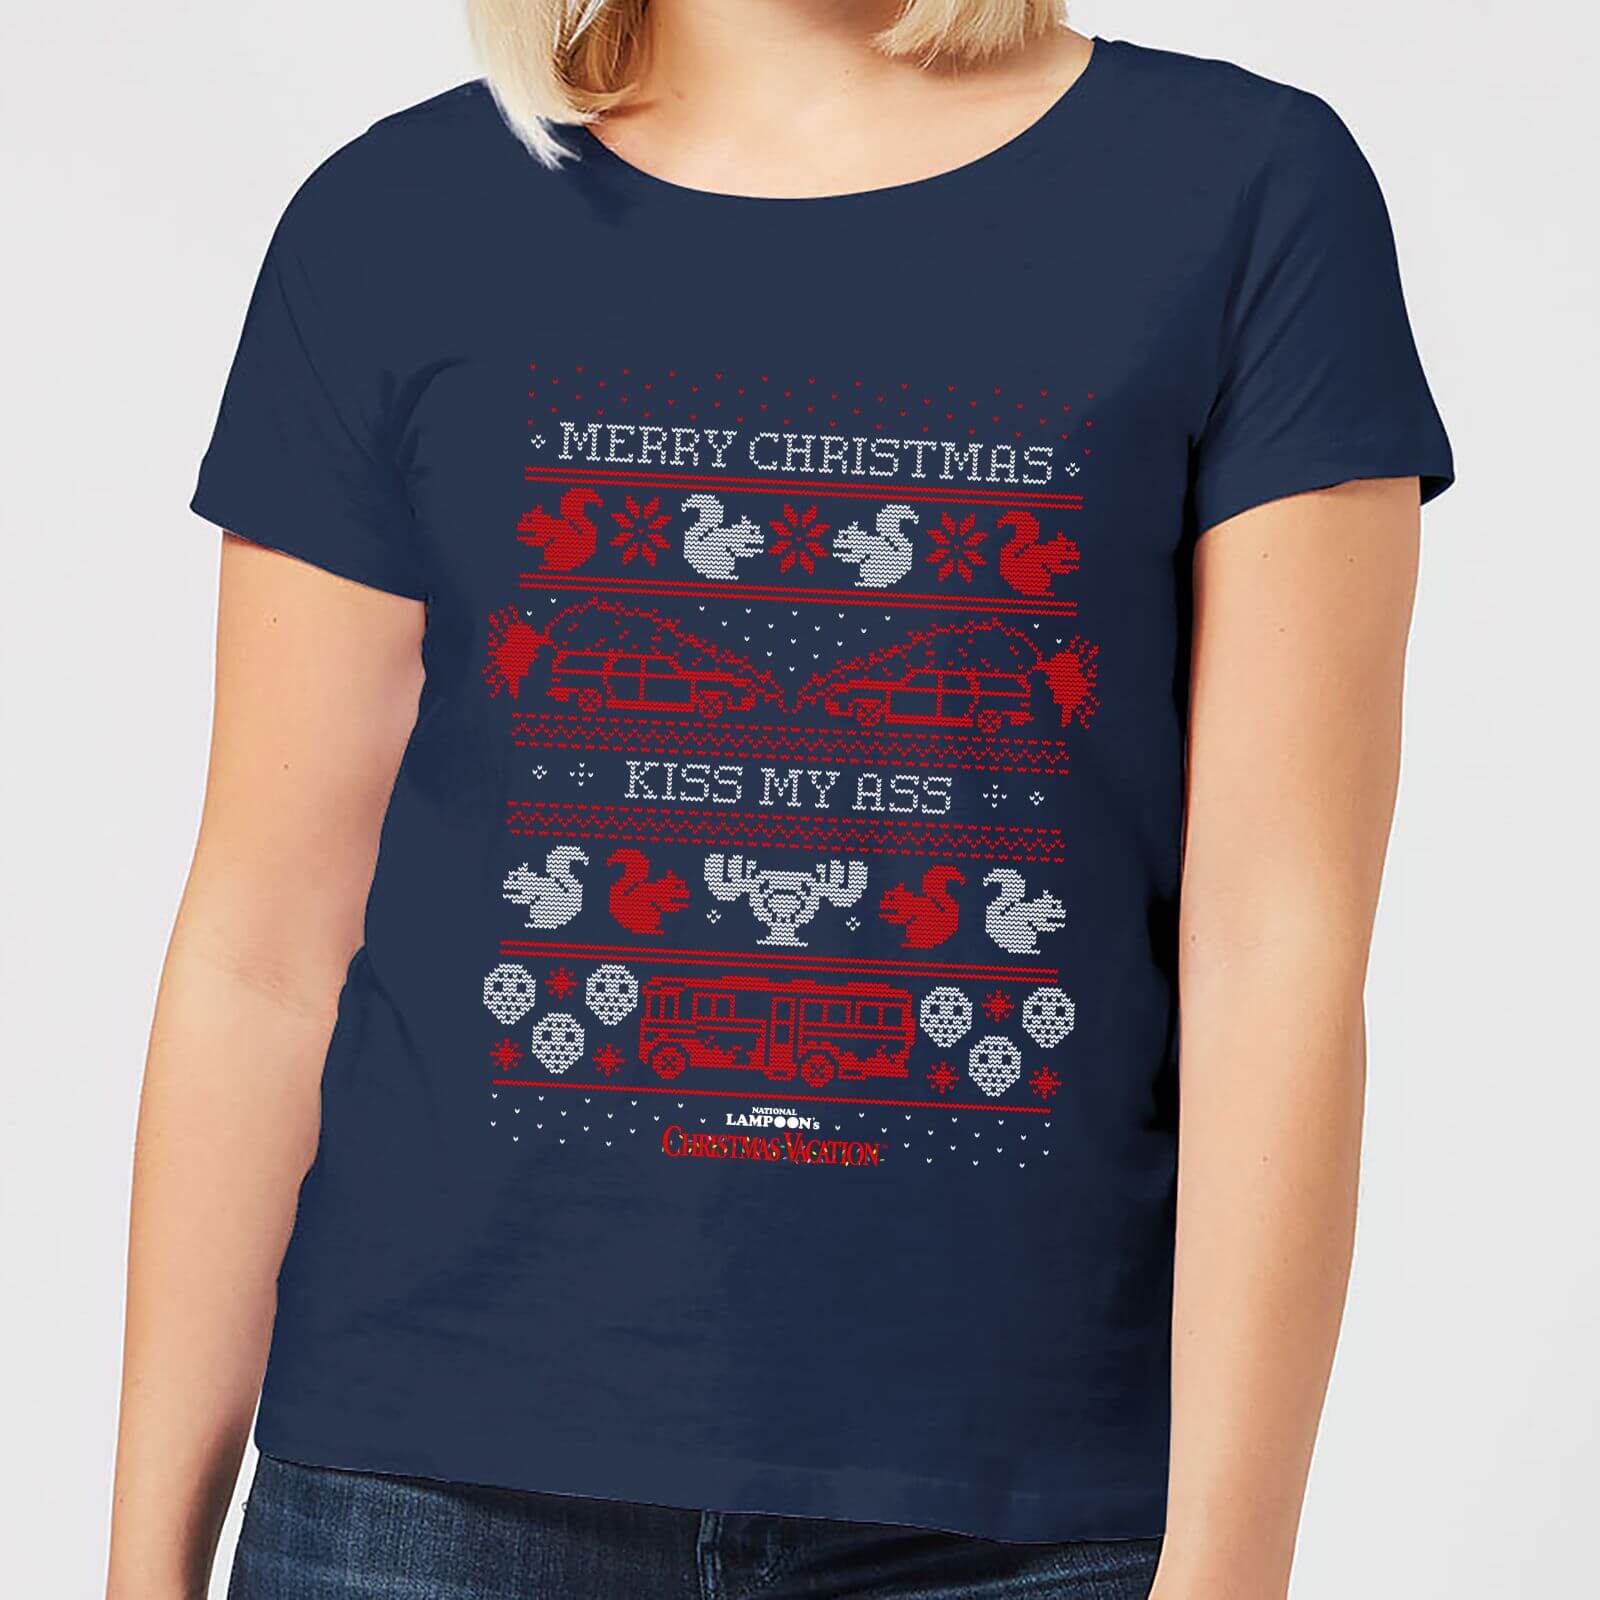 National Lampoon Merry Christmas Knit Women's Christmas T-Shirt - Navy - S - Navy